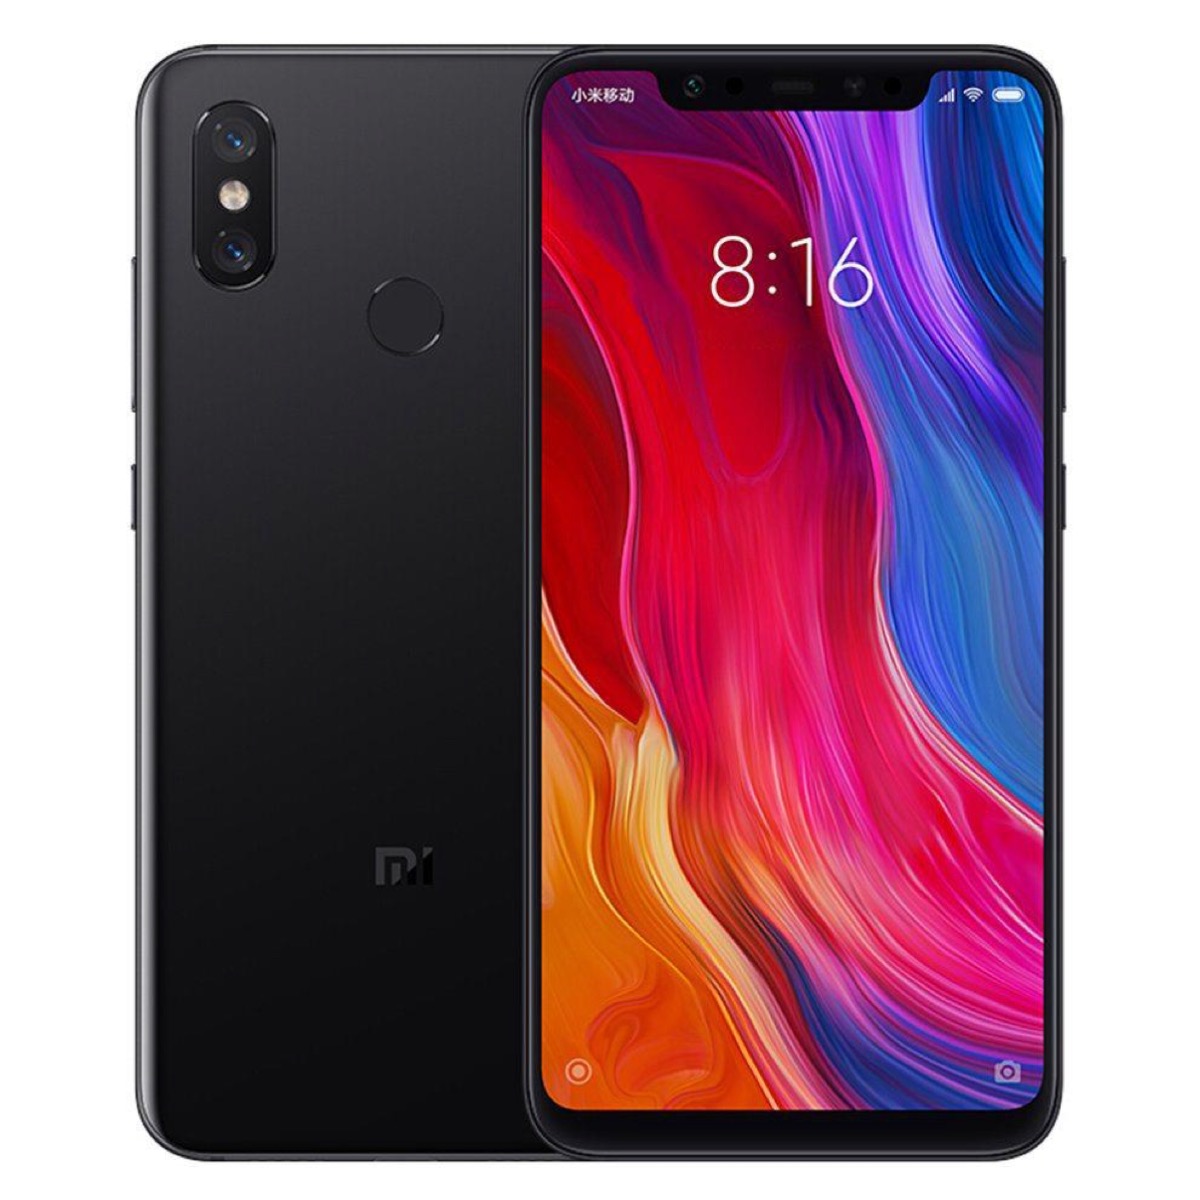 Sell Mi 8 in Singapore